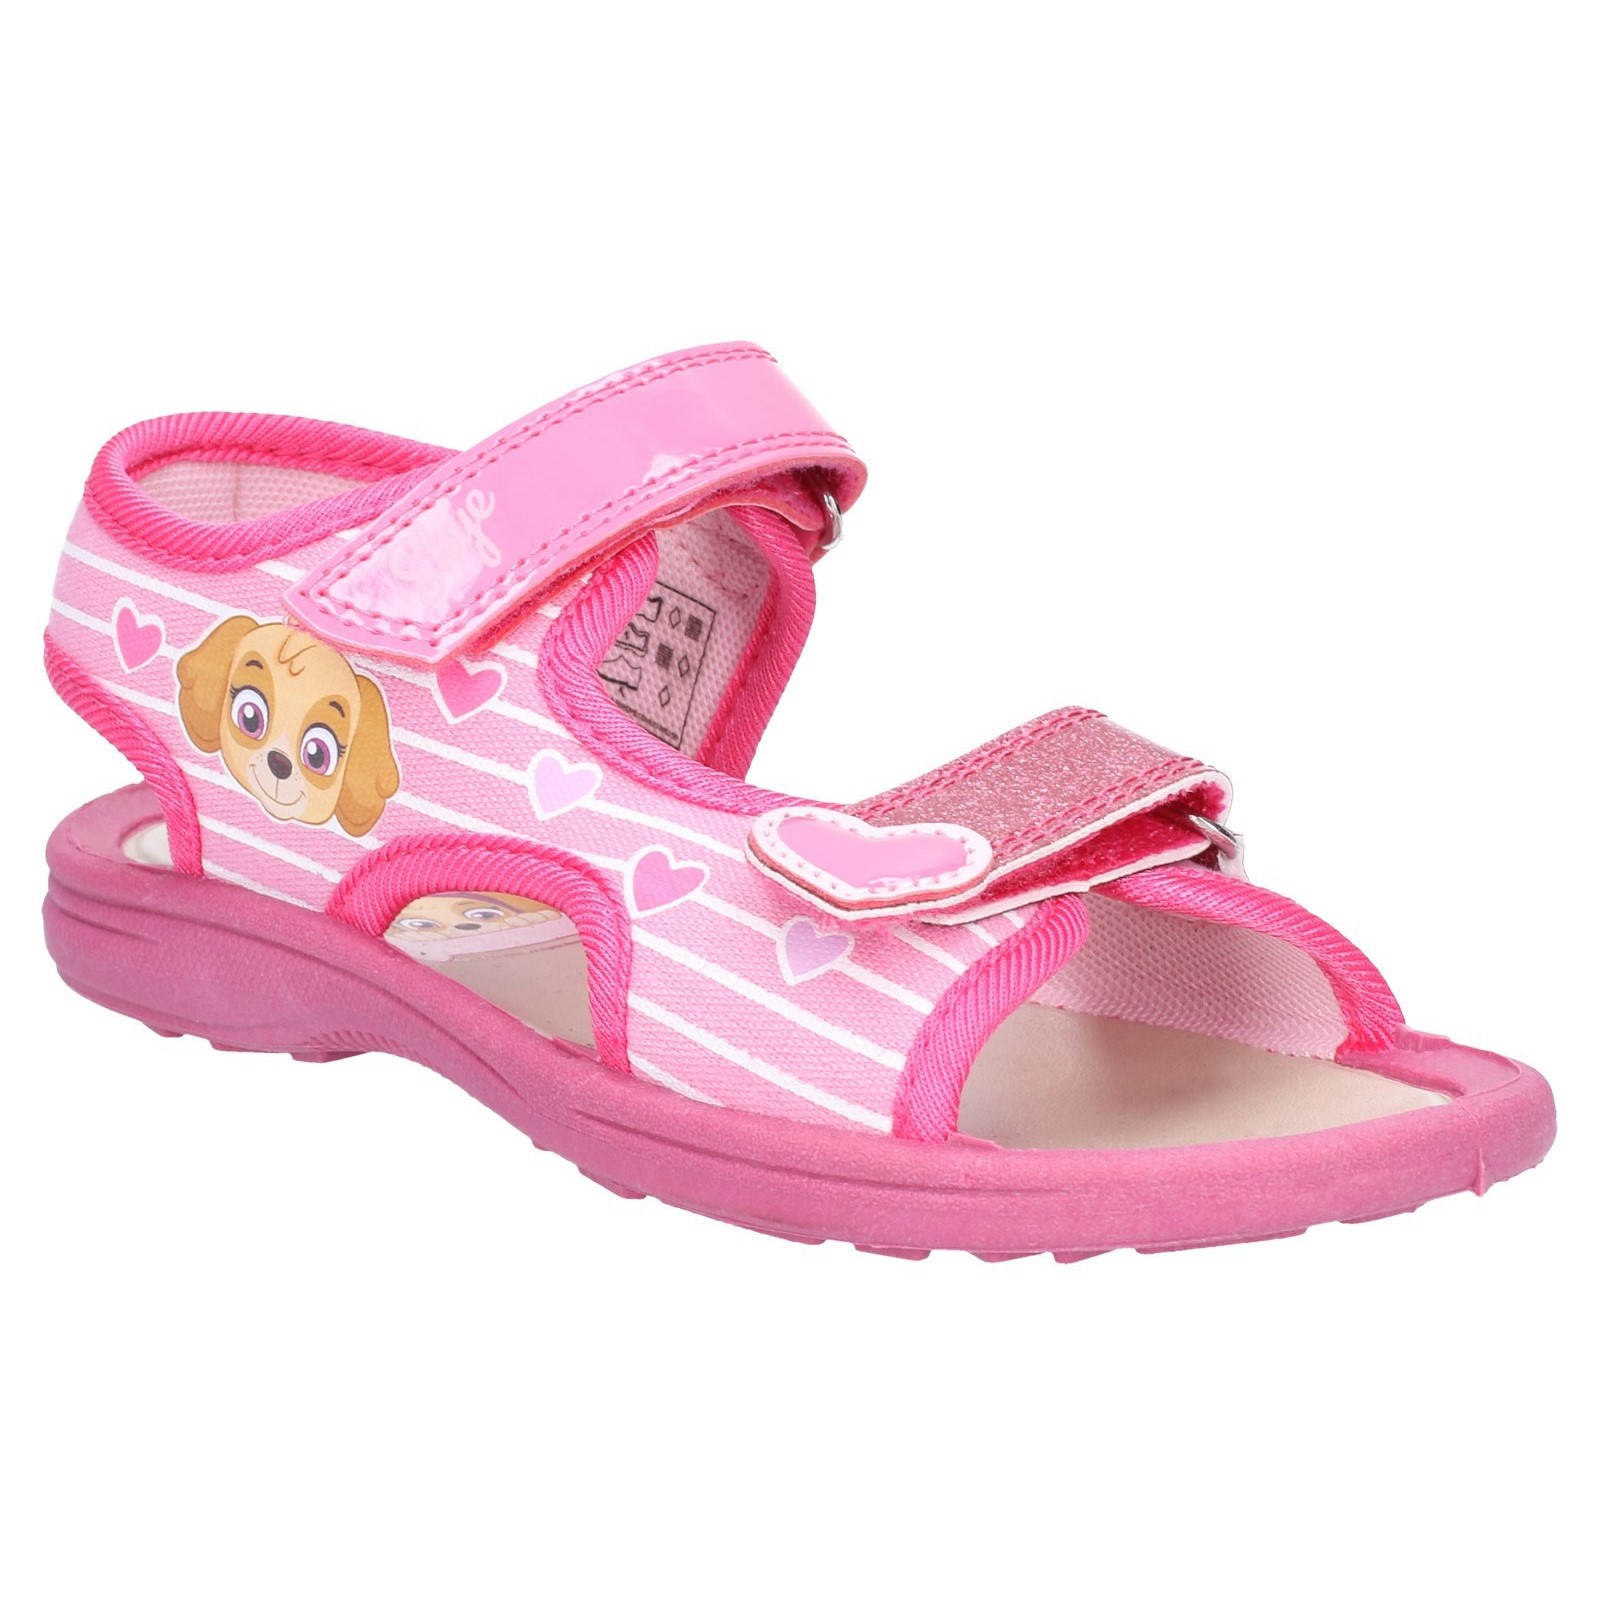 Paw Patrol Classic Sandals Touch Fastening Shoe